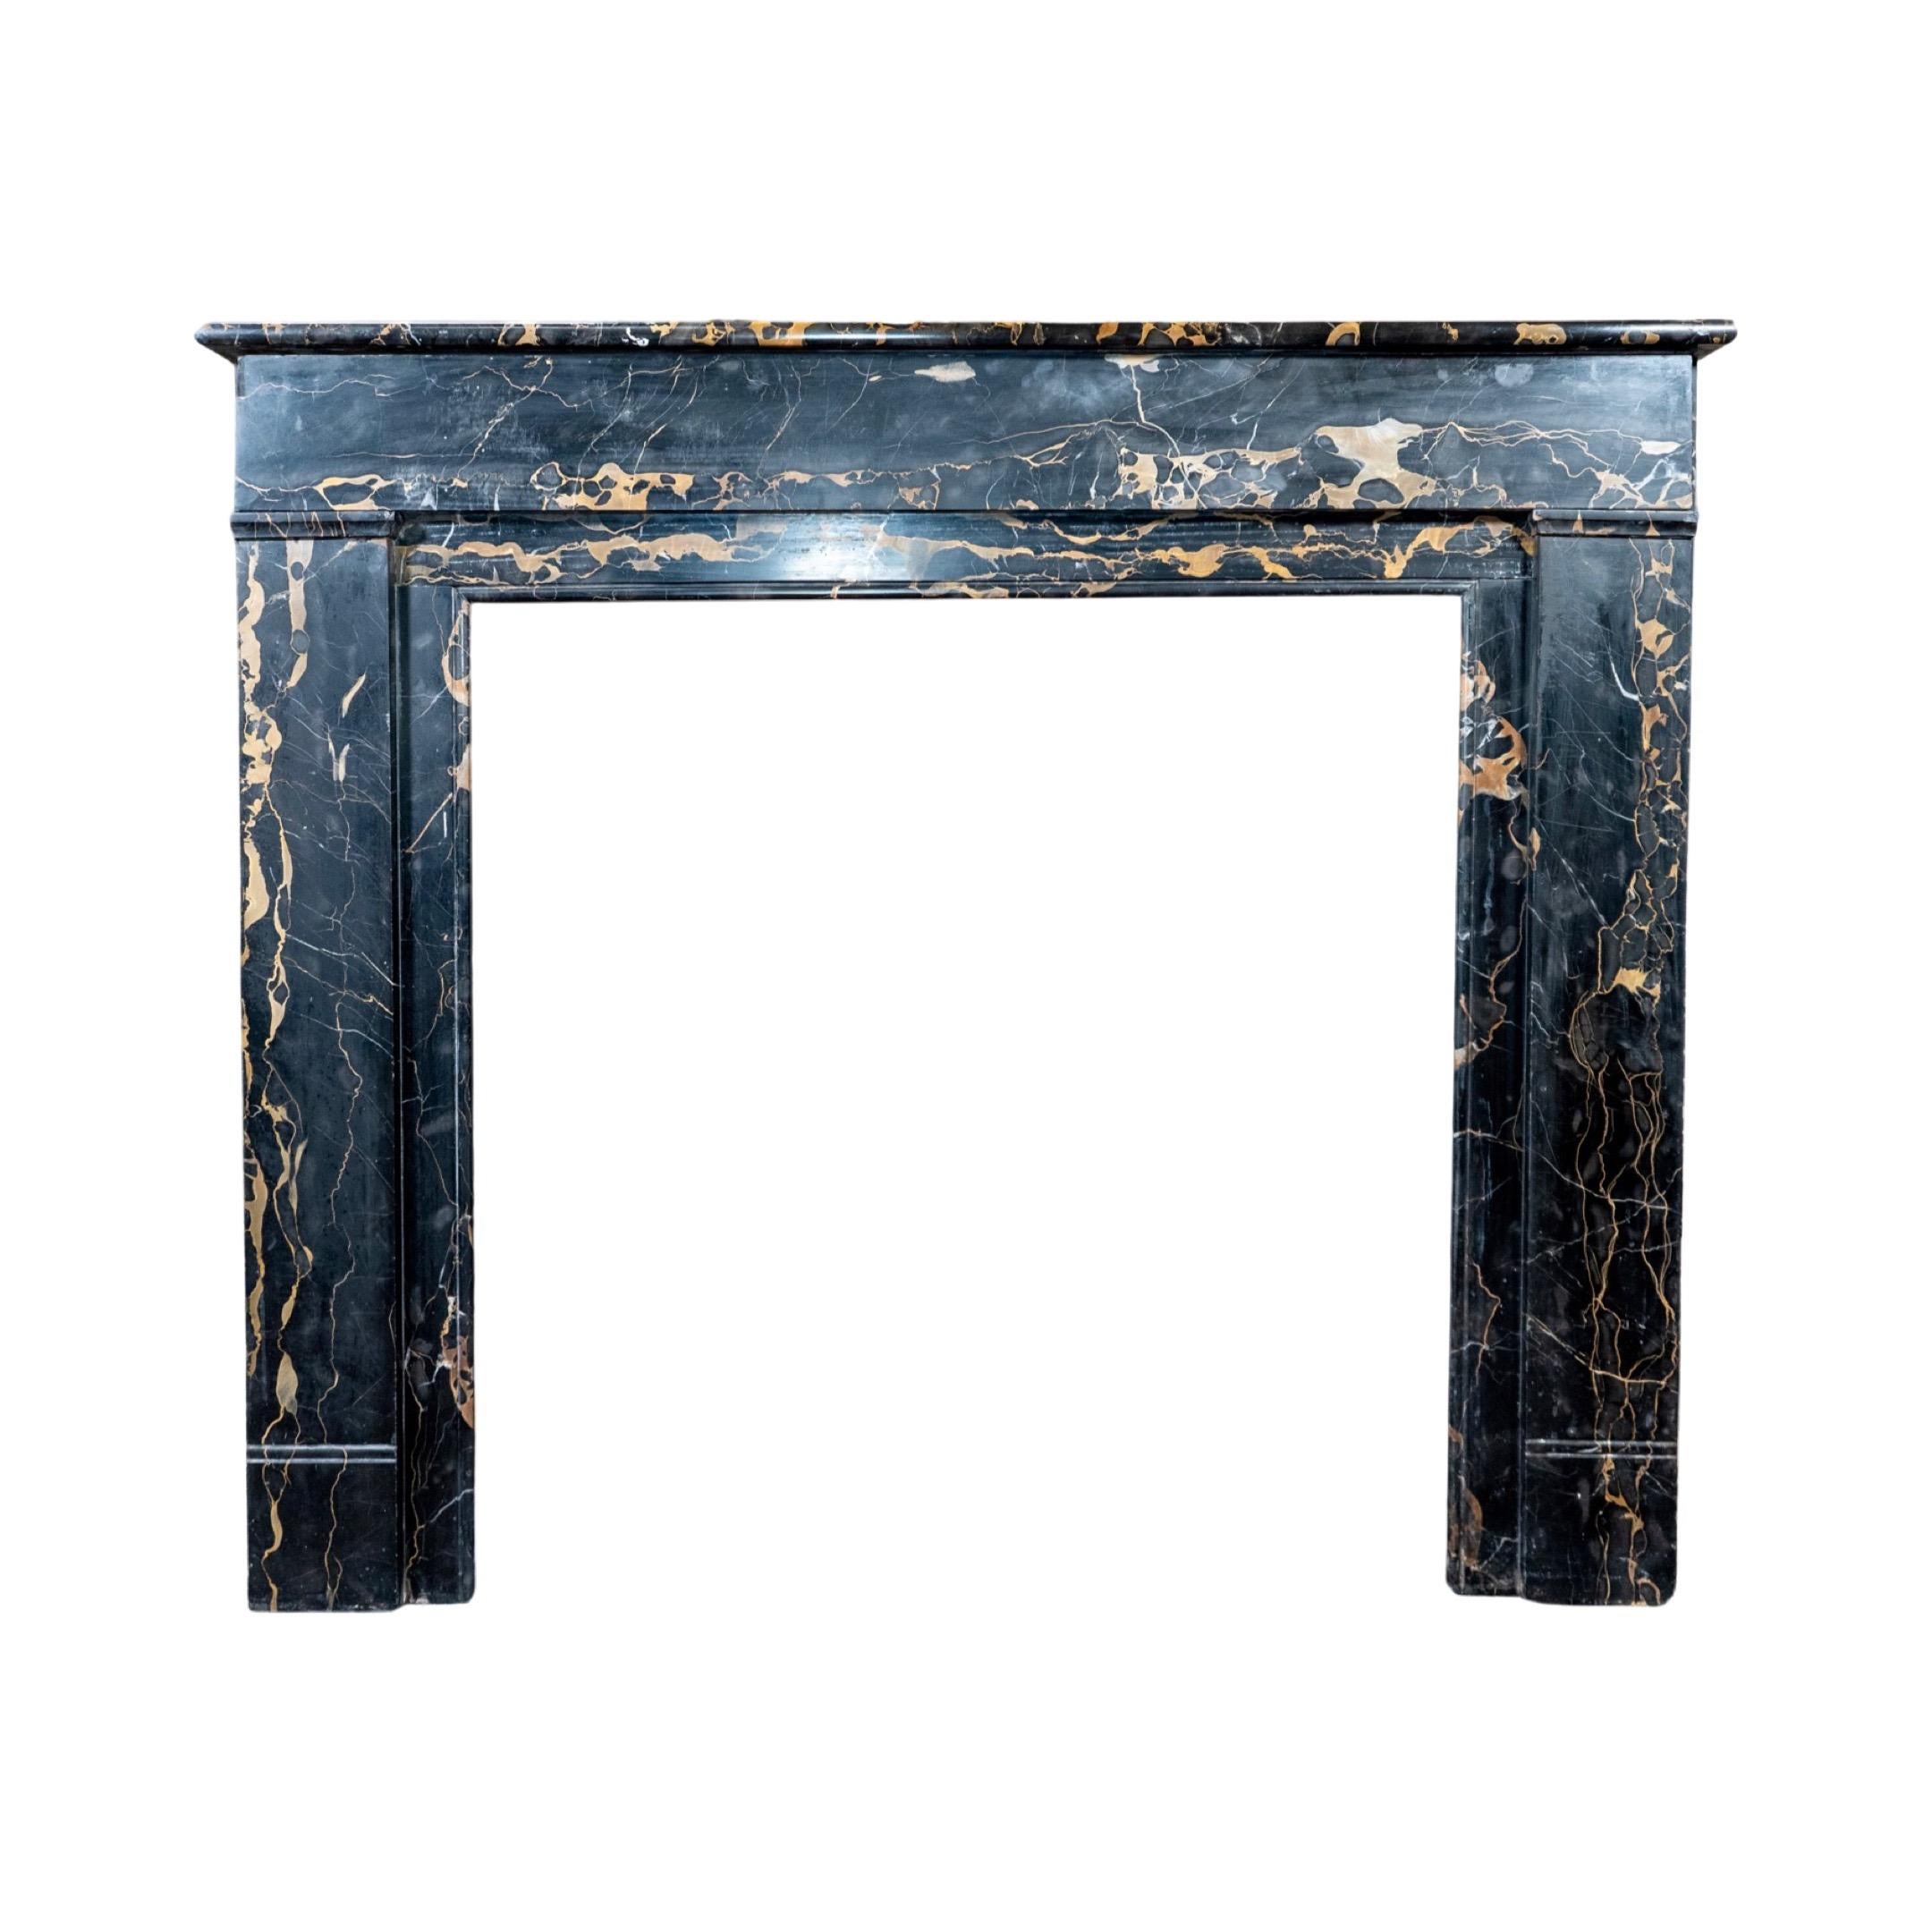 This elegant French Portoro Marble Mantel is a luxurious piece of history. Crafted with 1890 French marble, the Louis XVI style mantel exudes prestige and sophistication. Its timeless design will add sophistication and class to any room.